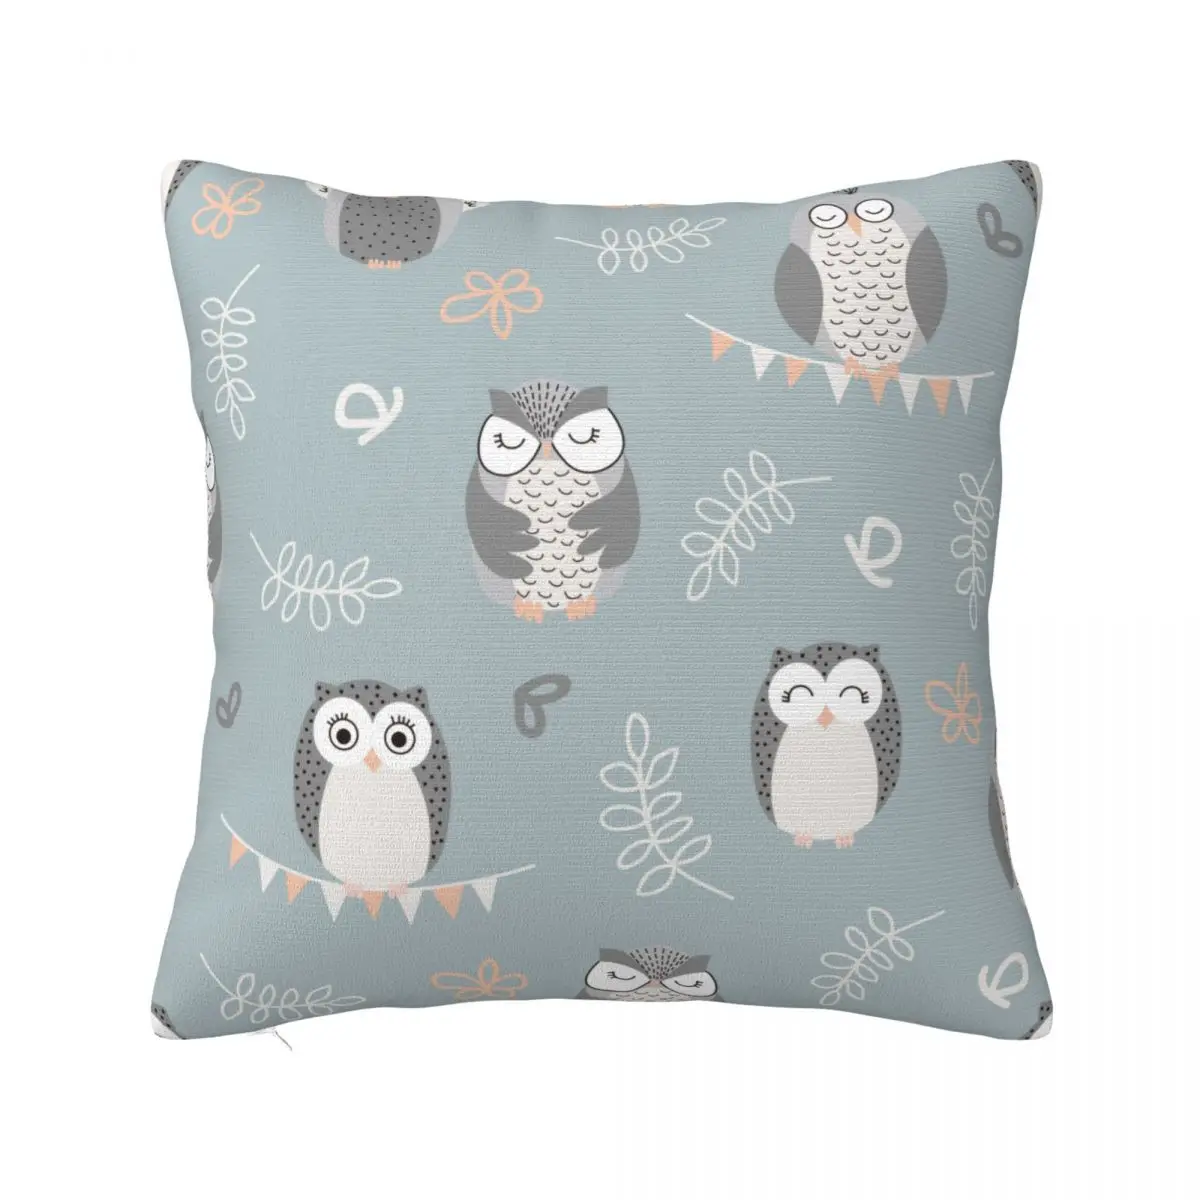 

Owl Animal Plaid Pillowcase Printing Polyester Cushion Cover Decor Cartoon Collage Pillow Case Cover Home Square 18"